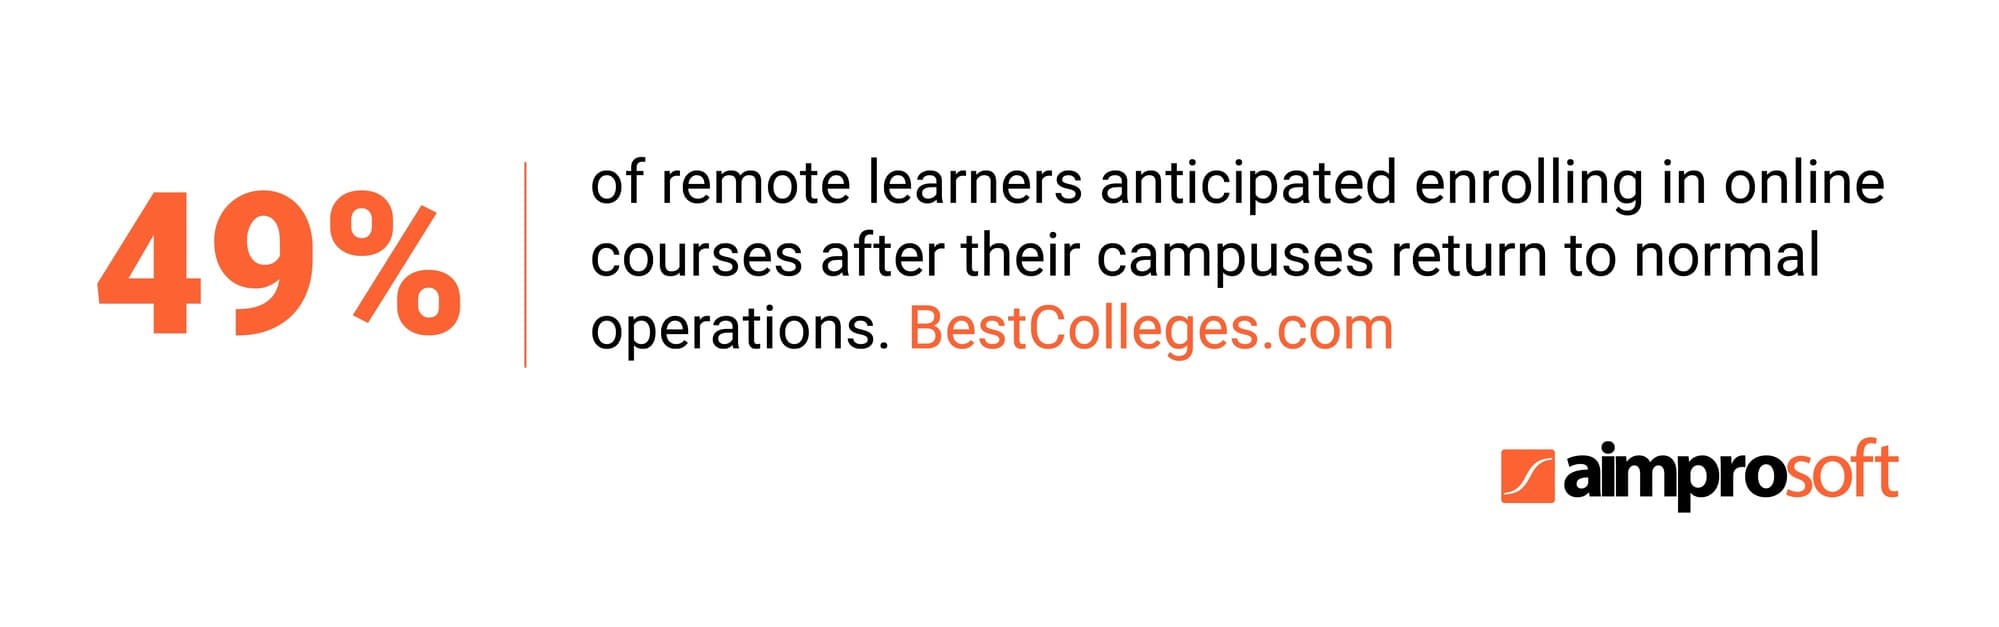 Online education is anticipated by 49% of remote learners placing it as trends